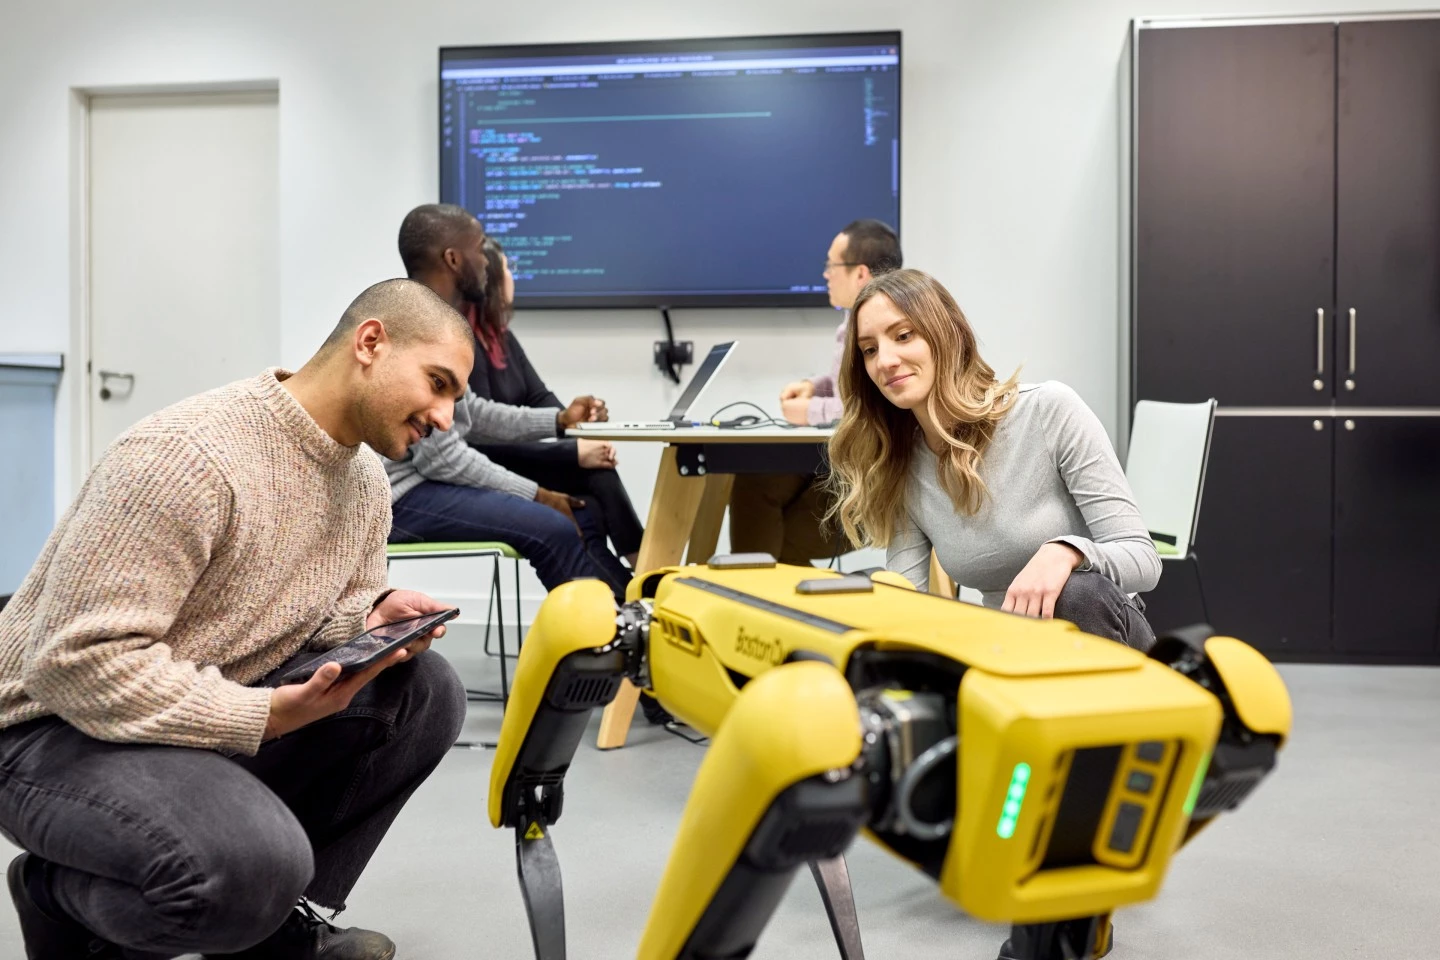 Two students using the Boston dynamics robot while another group of students work on code at a desk